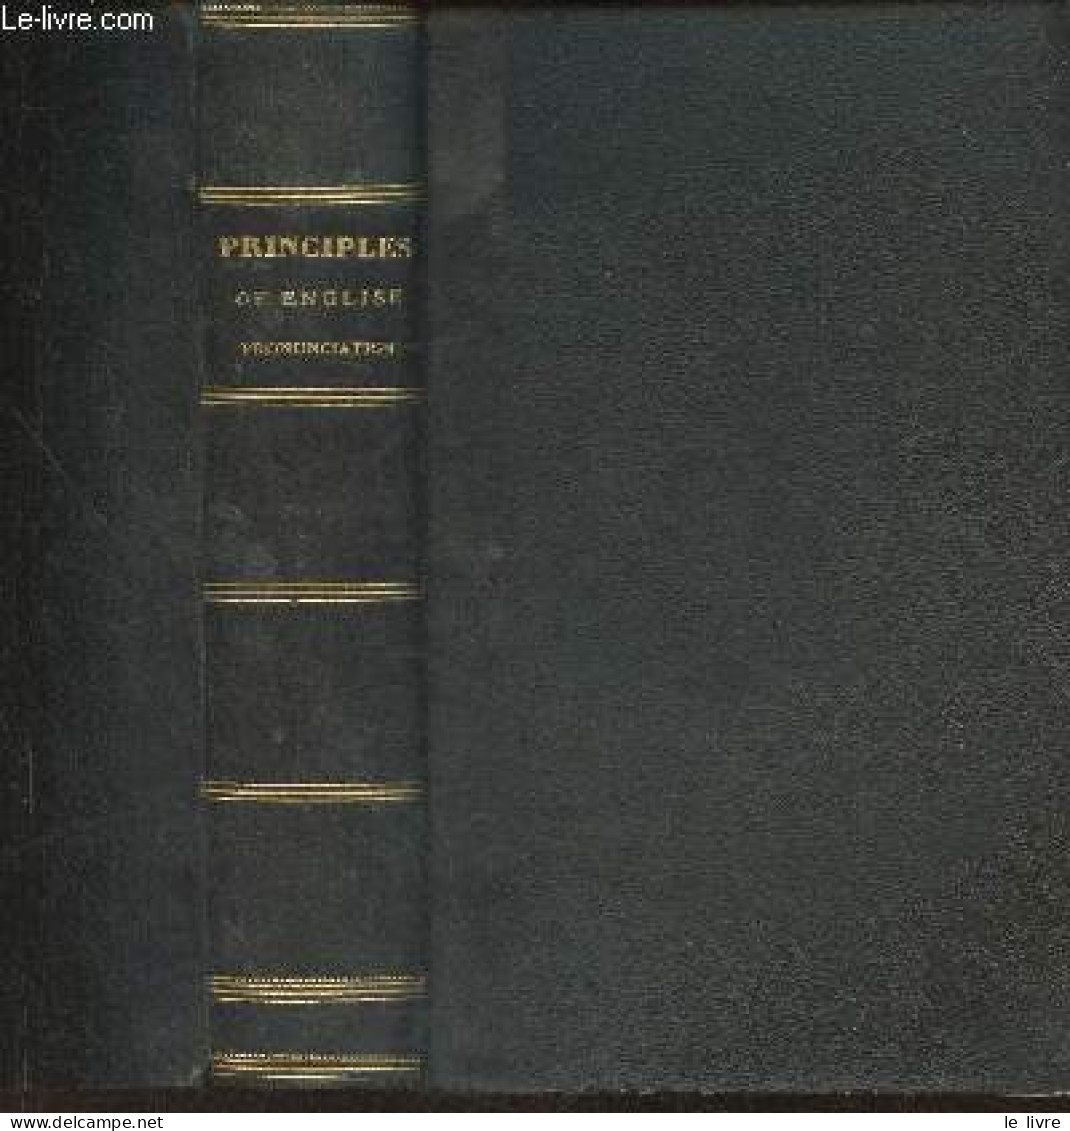 A Critical Pronouncing Dictionary And Expositor Of The English Language To Xhich Are Prefixed Principles Of English Pron - Diccionarios